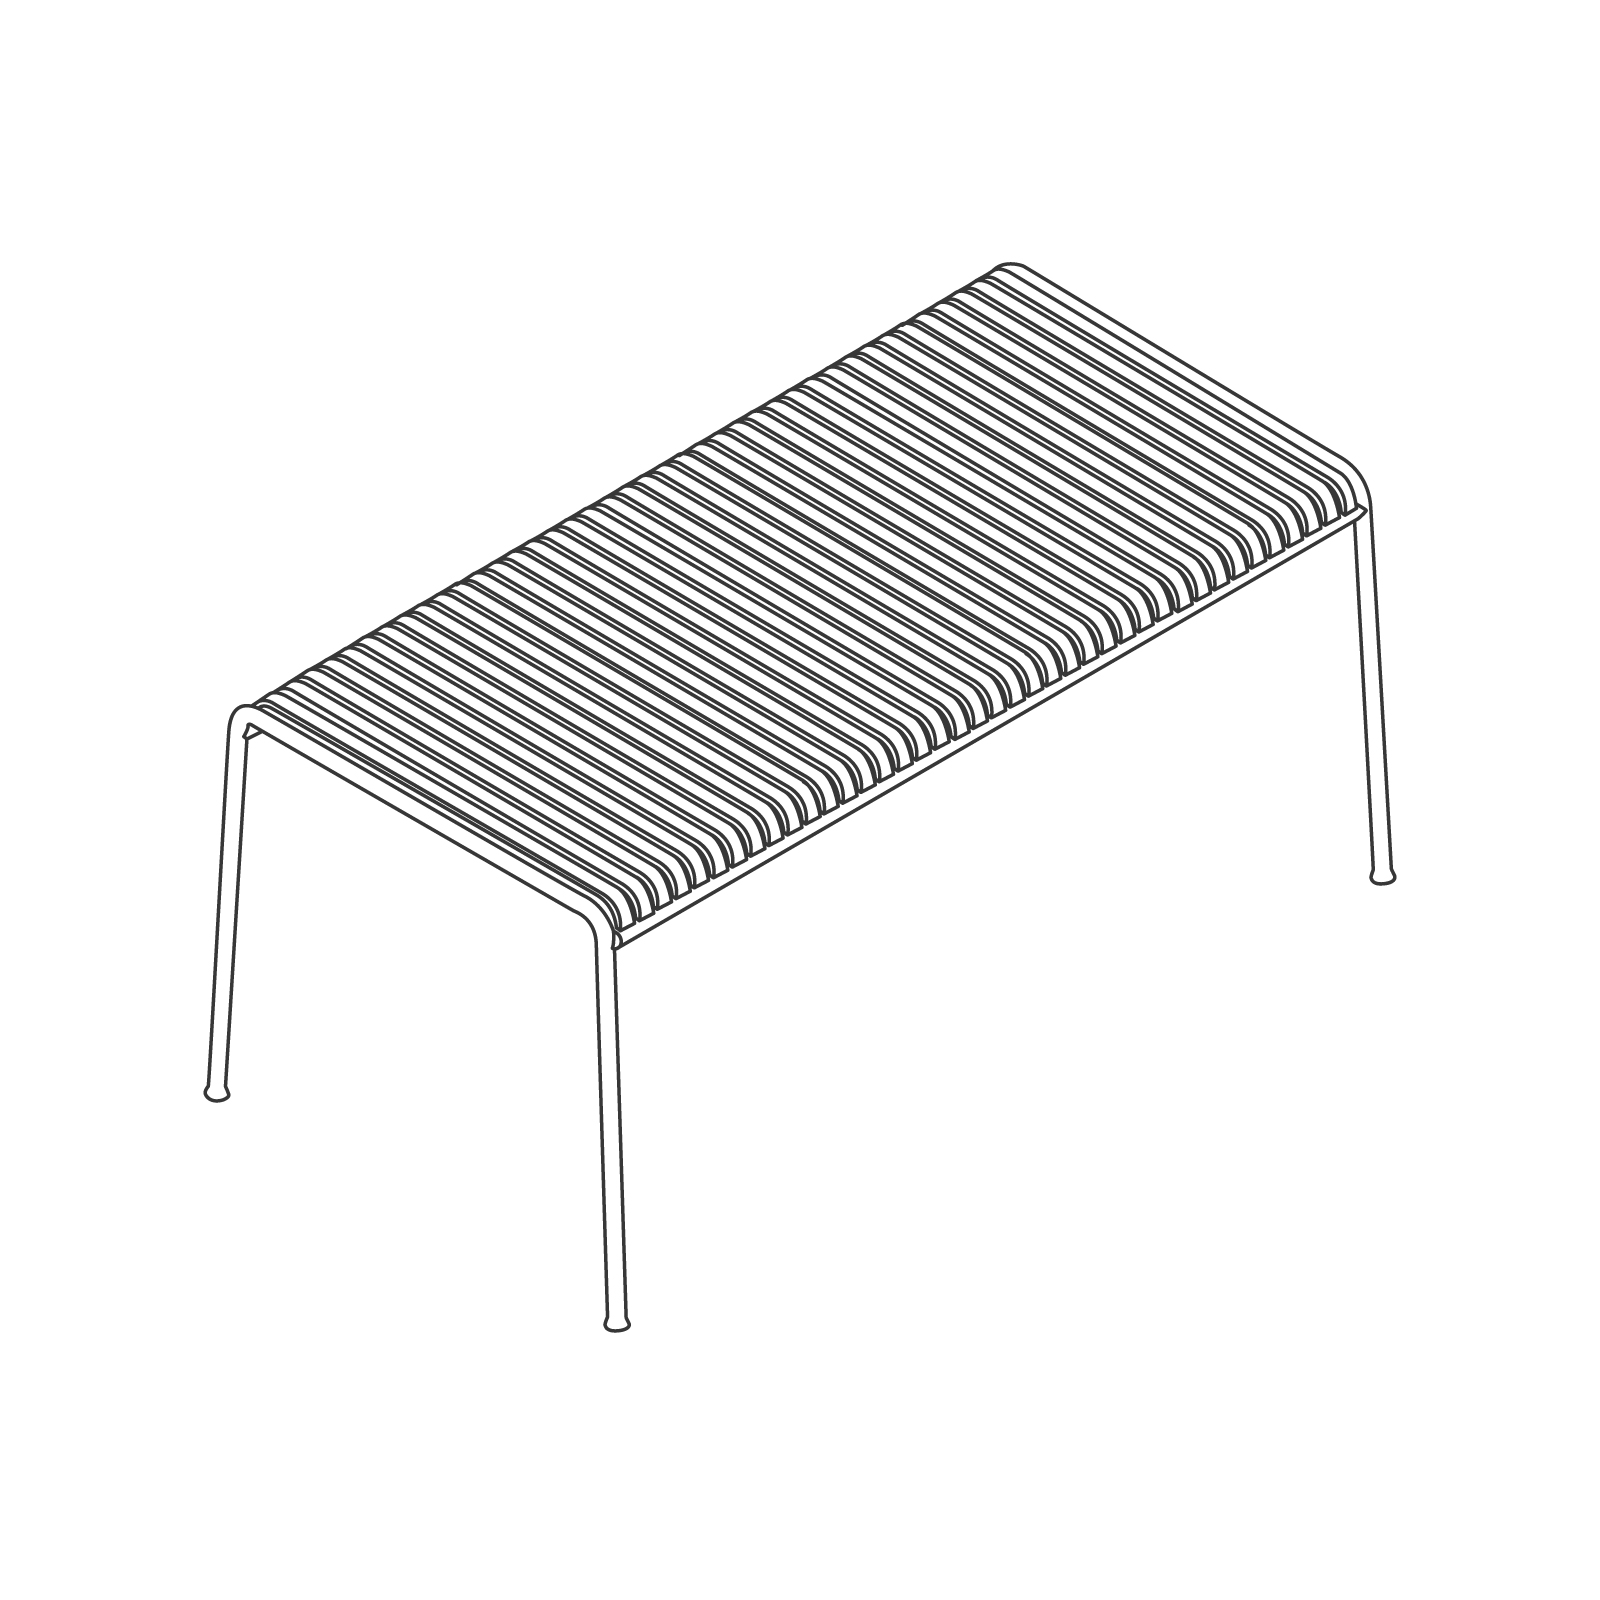 A line drawing - Palissade Table–Dining